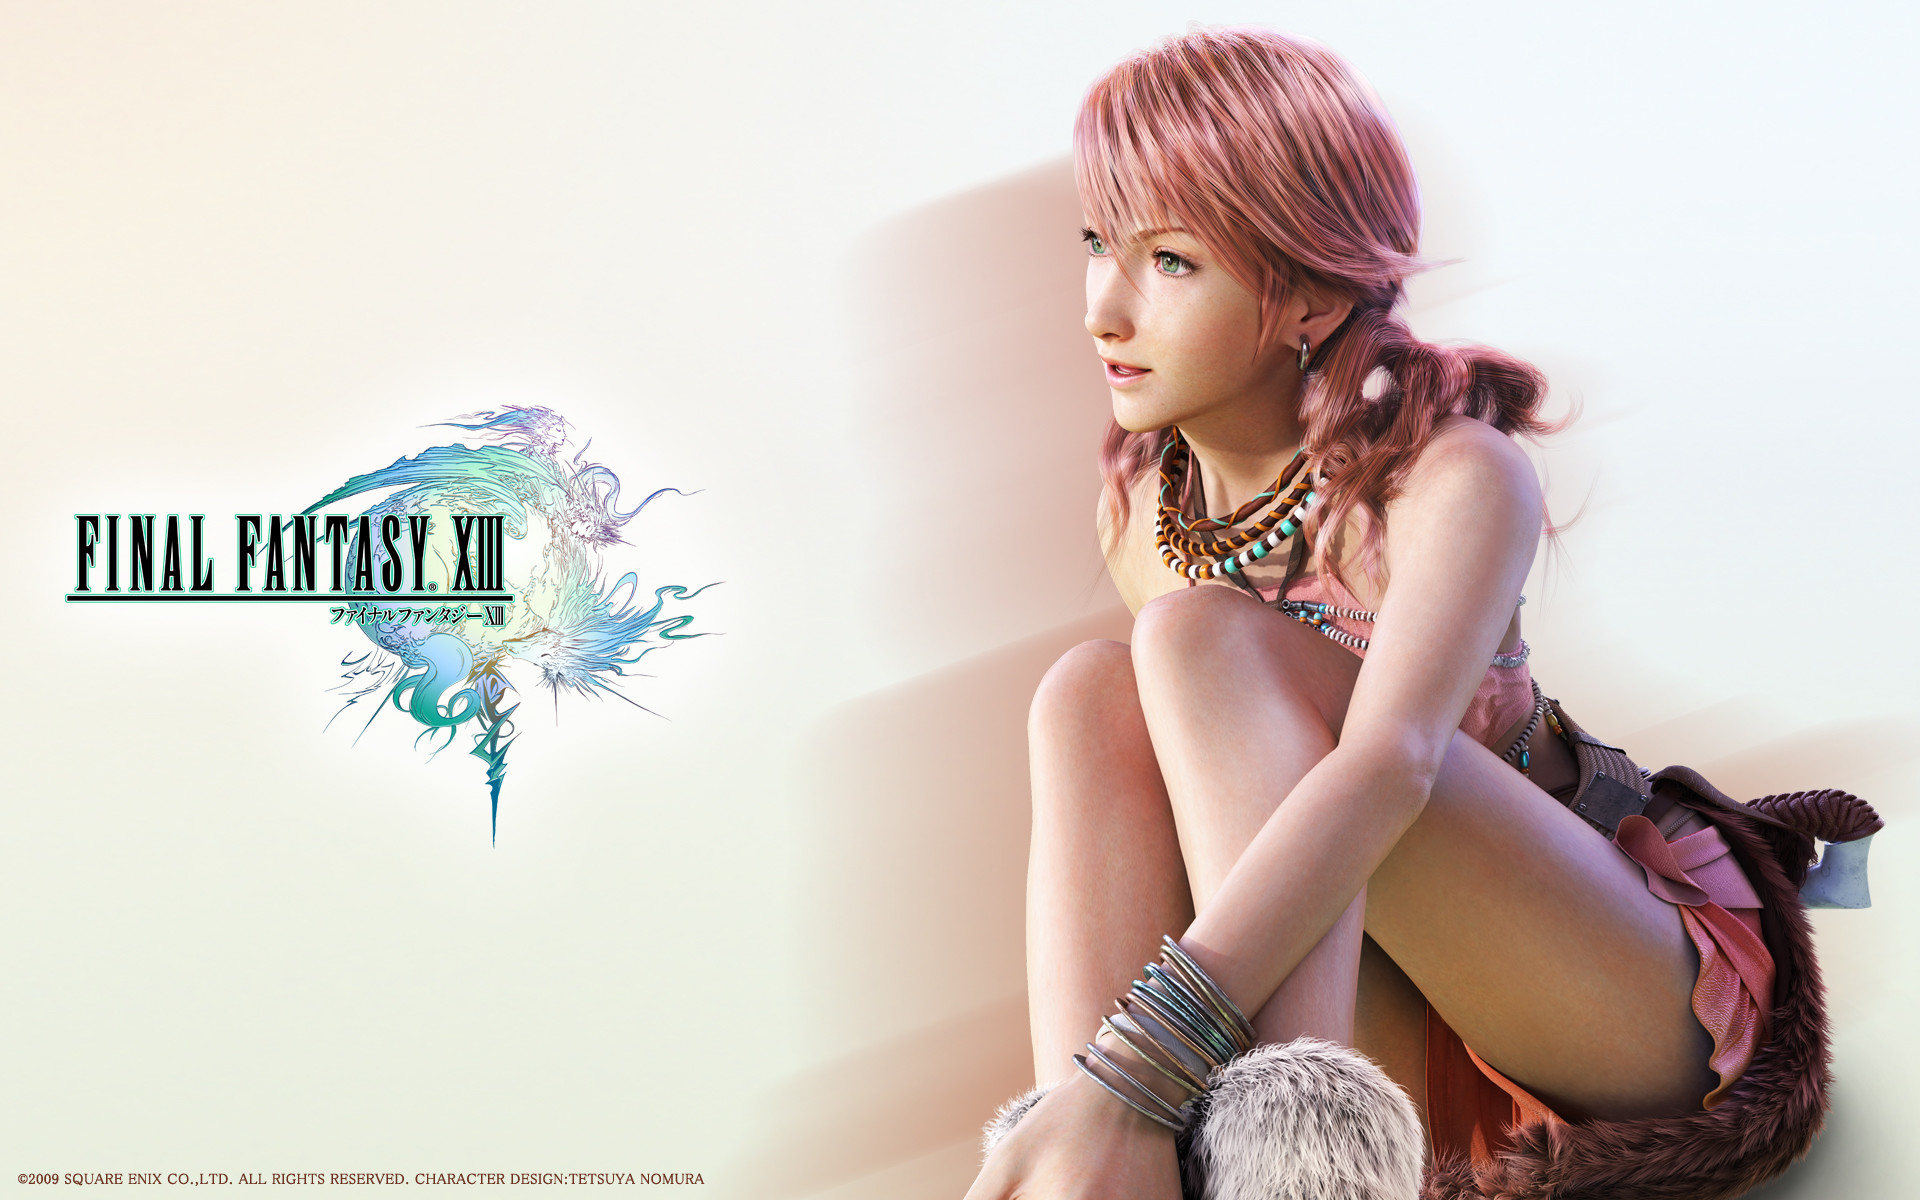 1920x1200 Search Results for “final fantasy xiii vanille wallpaper” – Adorable  Wallpapers